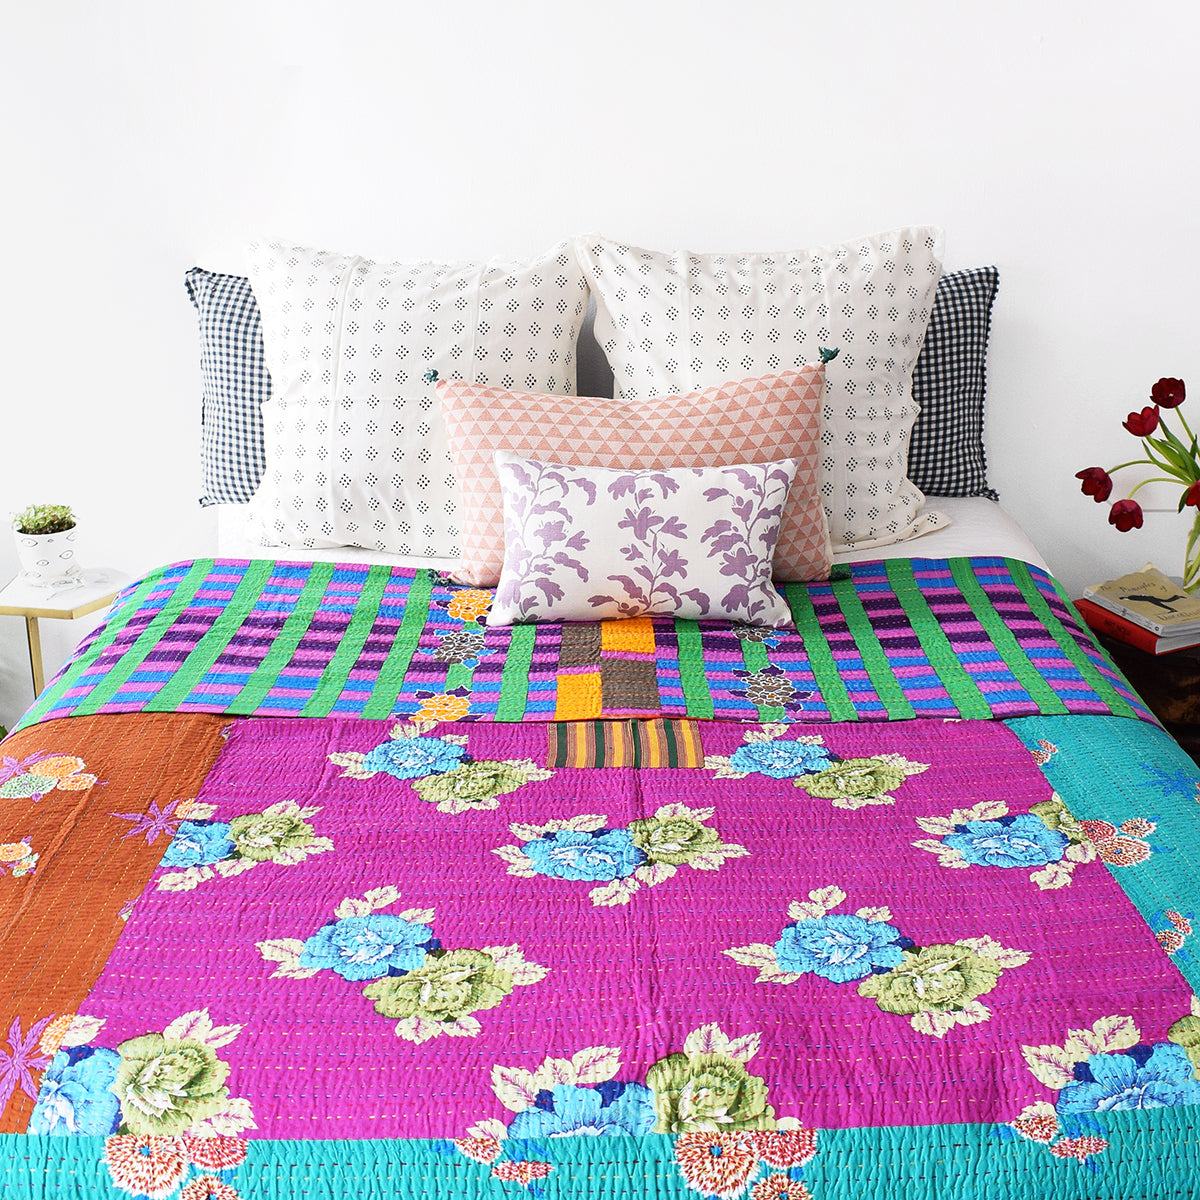 Linge Particulier Anthracite Gingham Standard Linen Pillowcase Sham with a Lisa Corti Gudri kantha quilt for a colorful linen bedding look in dark check gingham - Collyer&#39;s Mansion